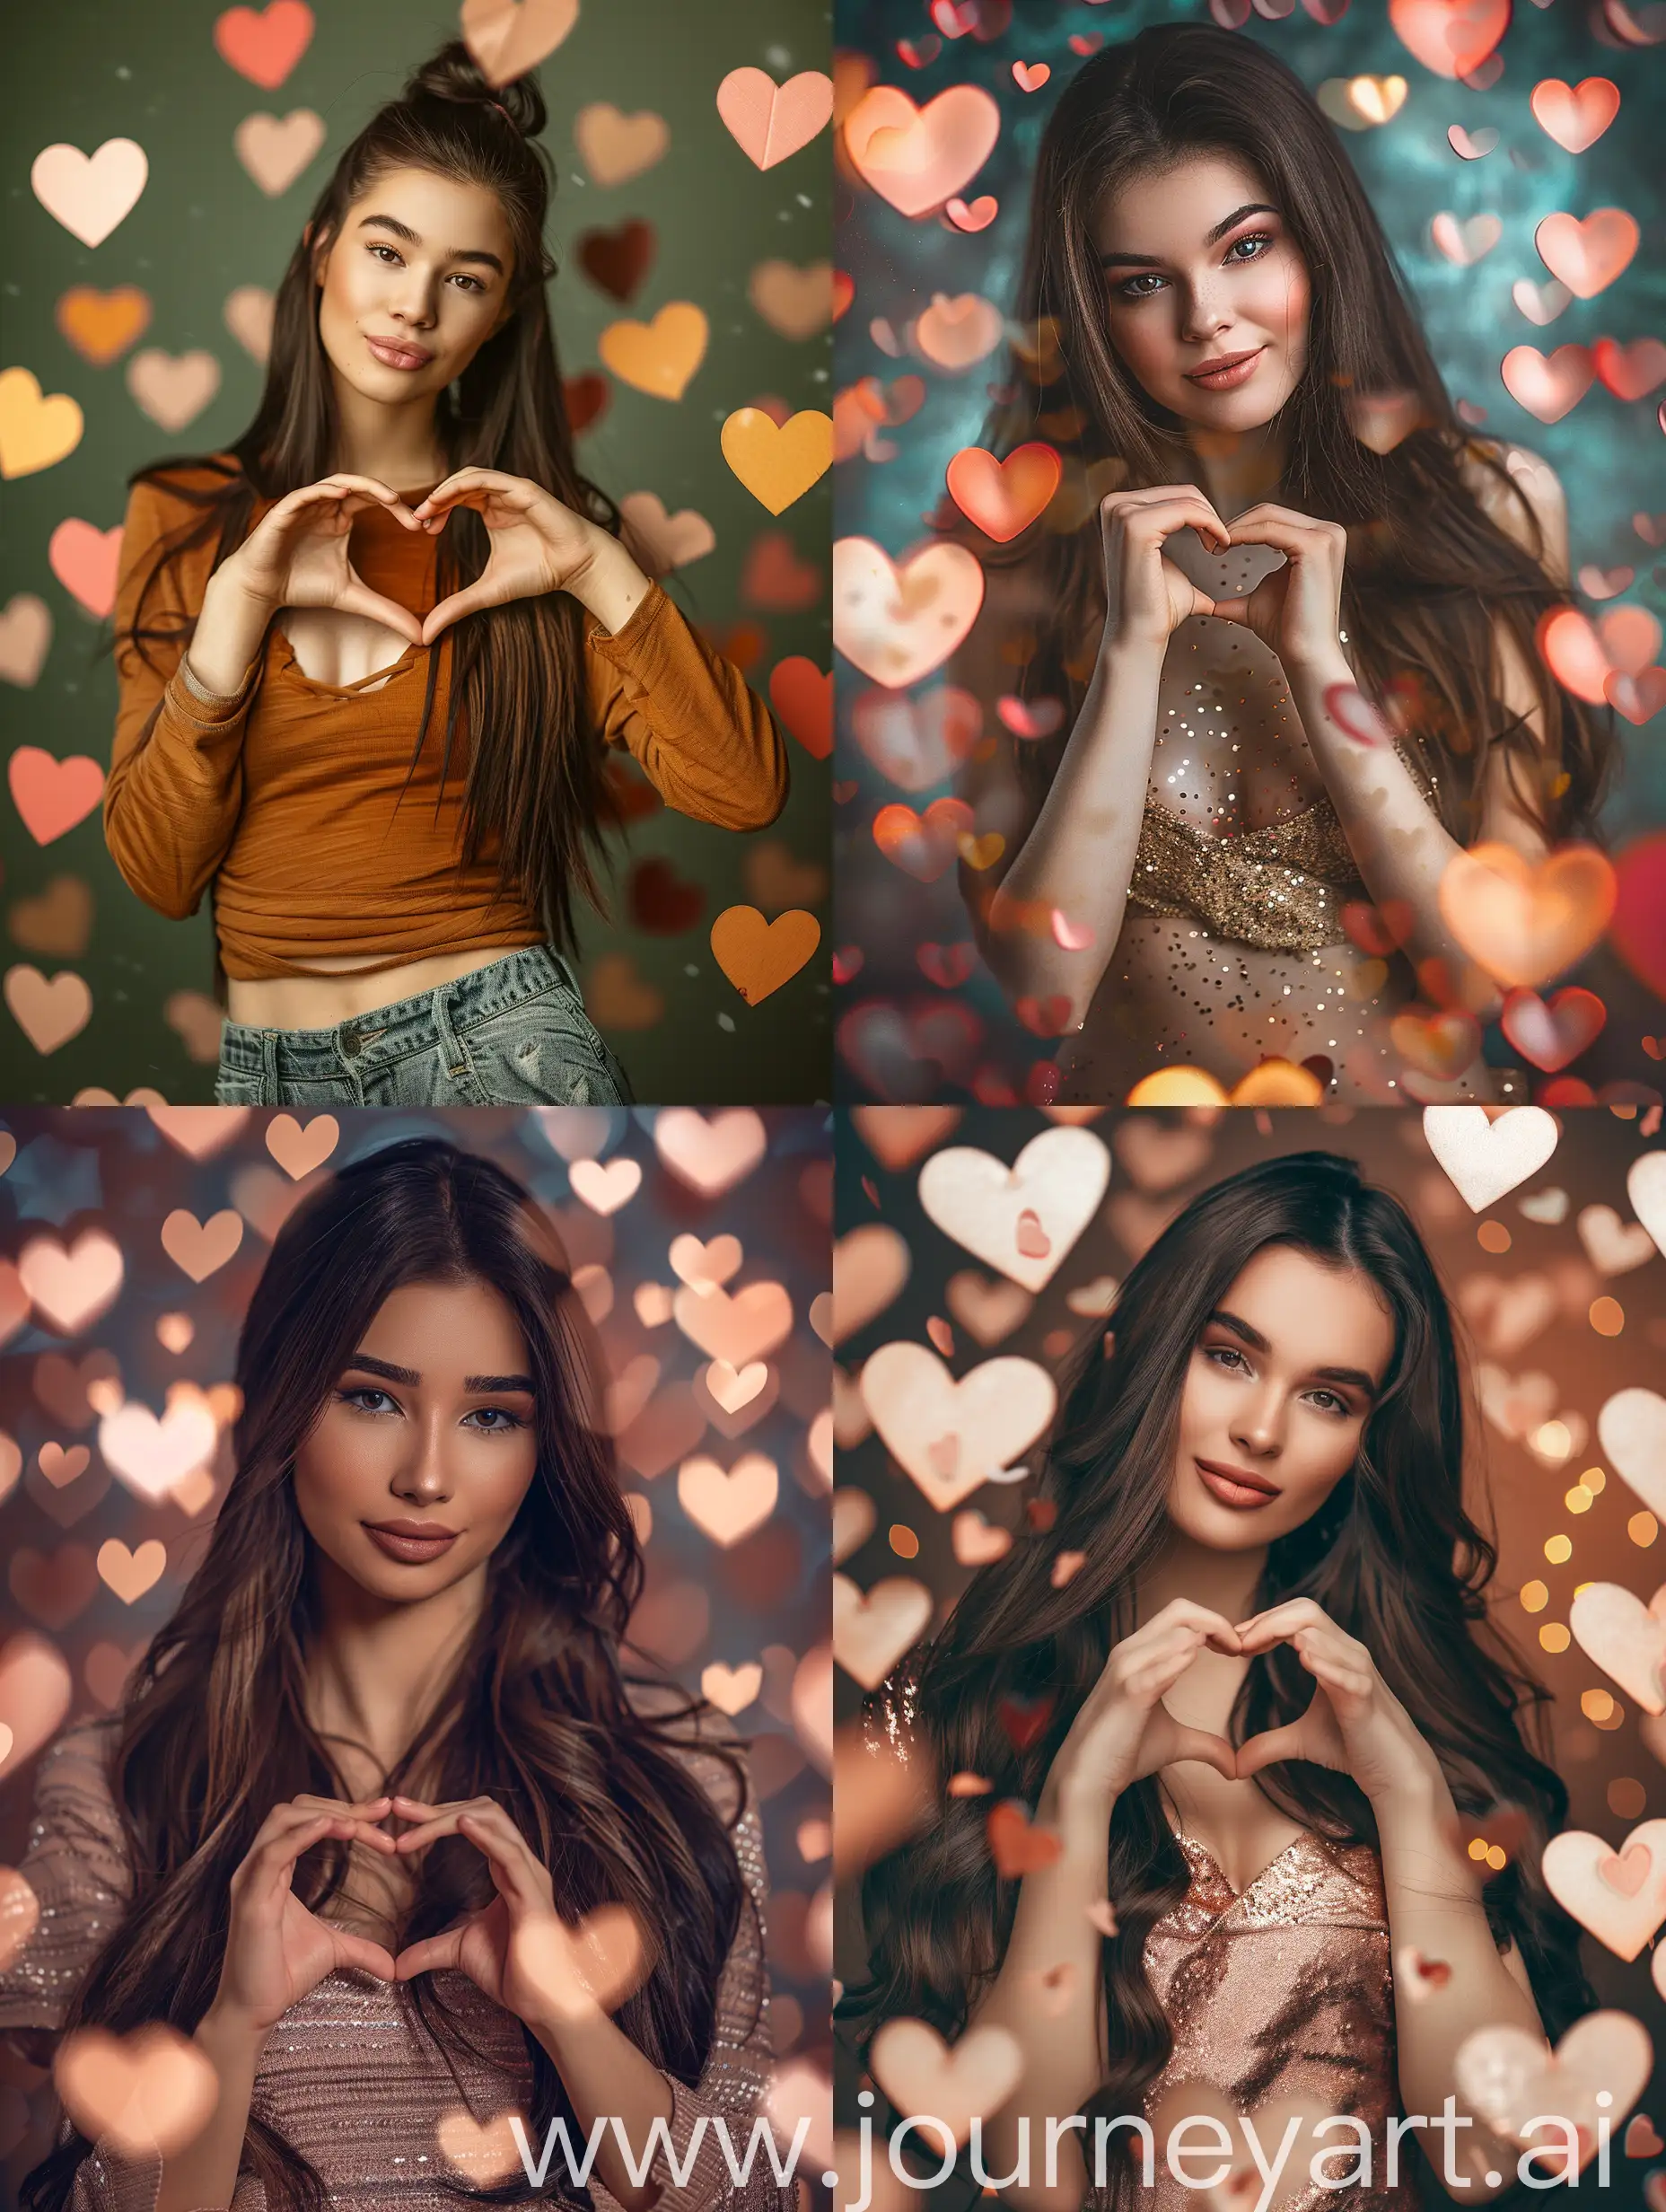 a pretty women standing among hearts, has dark long brown hair, full body pose photography, she is make a heart shape with her hands, realistic photo